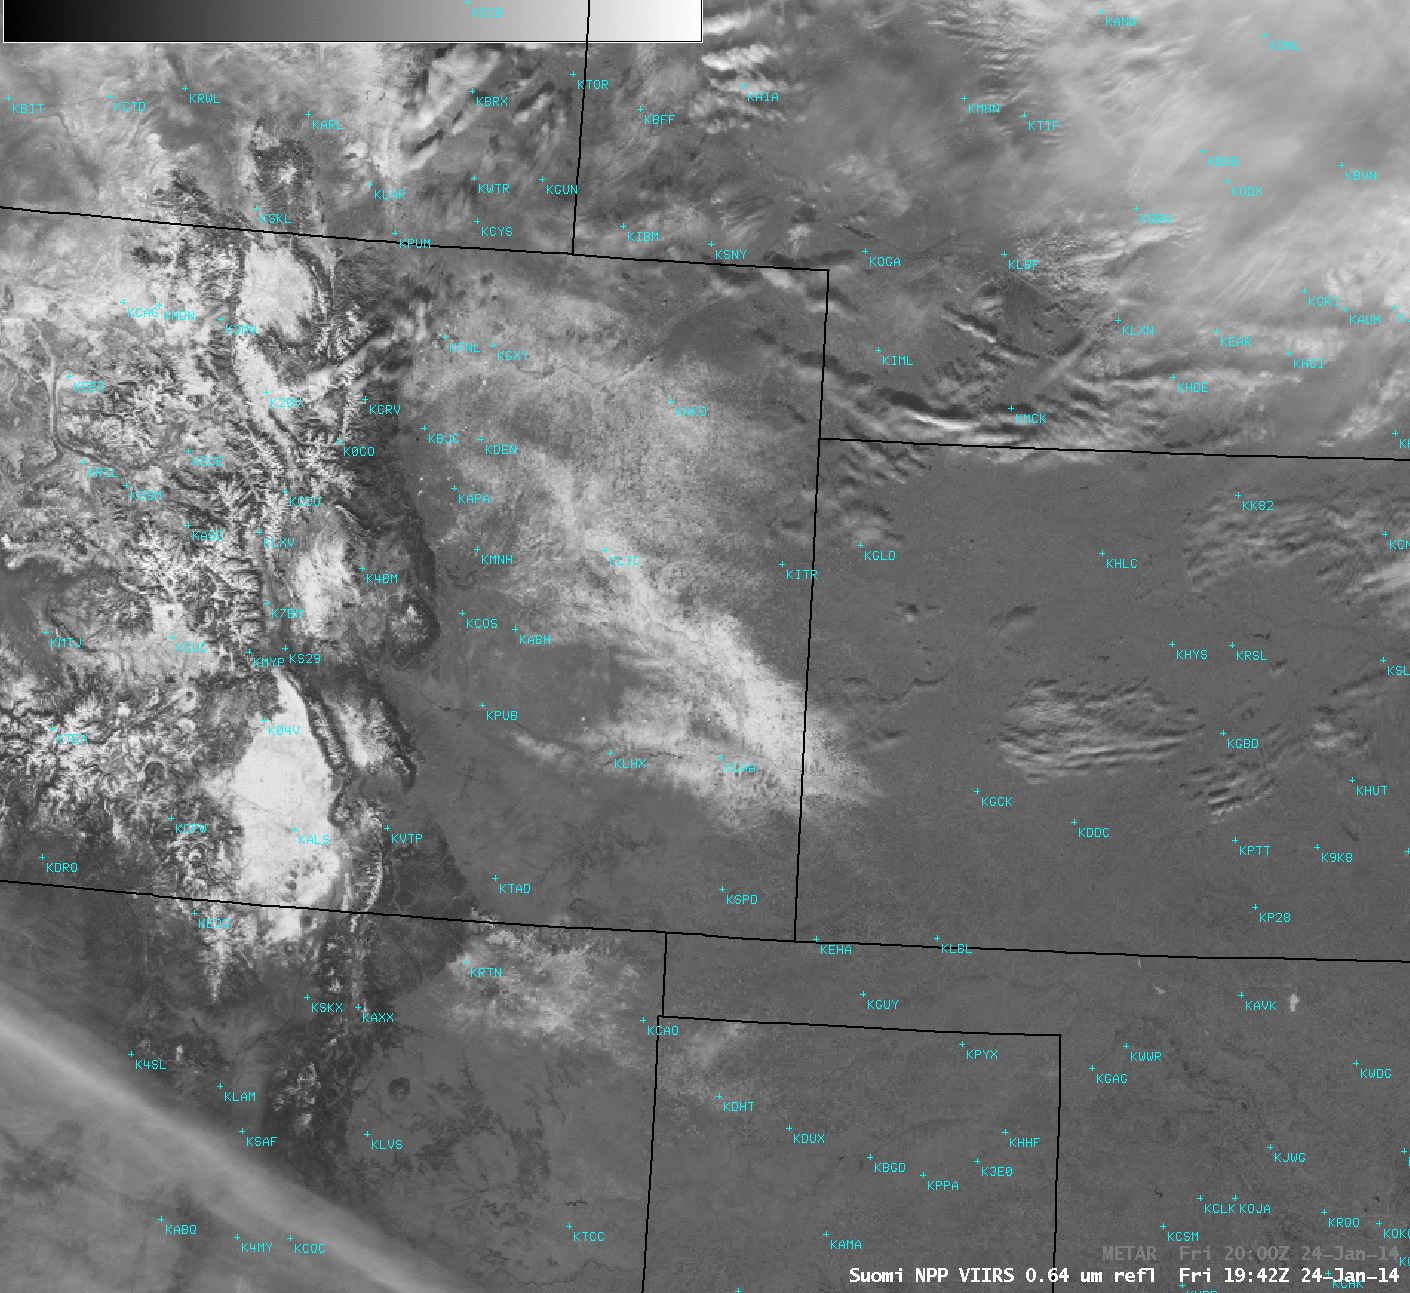 Suomi NPP VIIRS 0.64 Âµm visible channel image, with METAR surface reports 